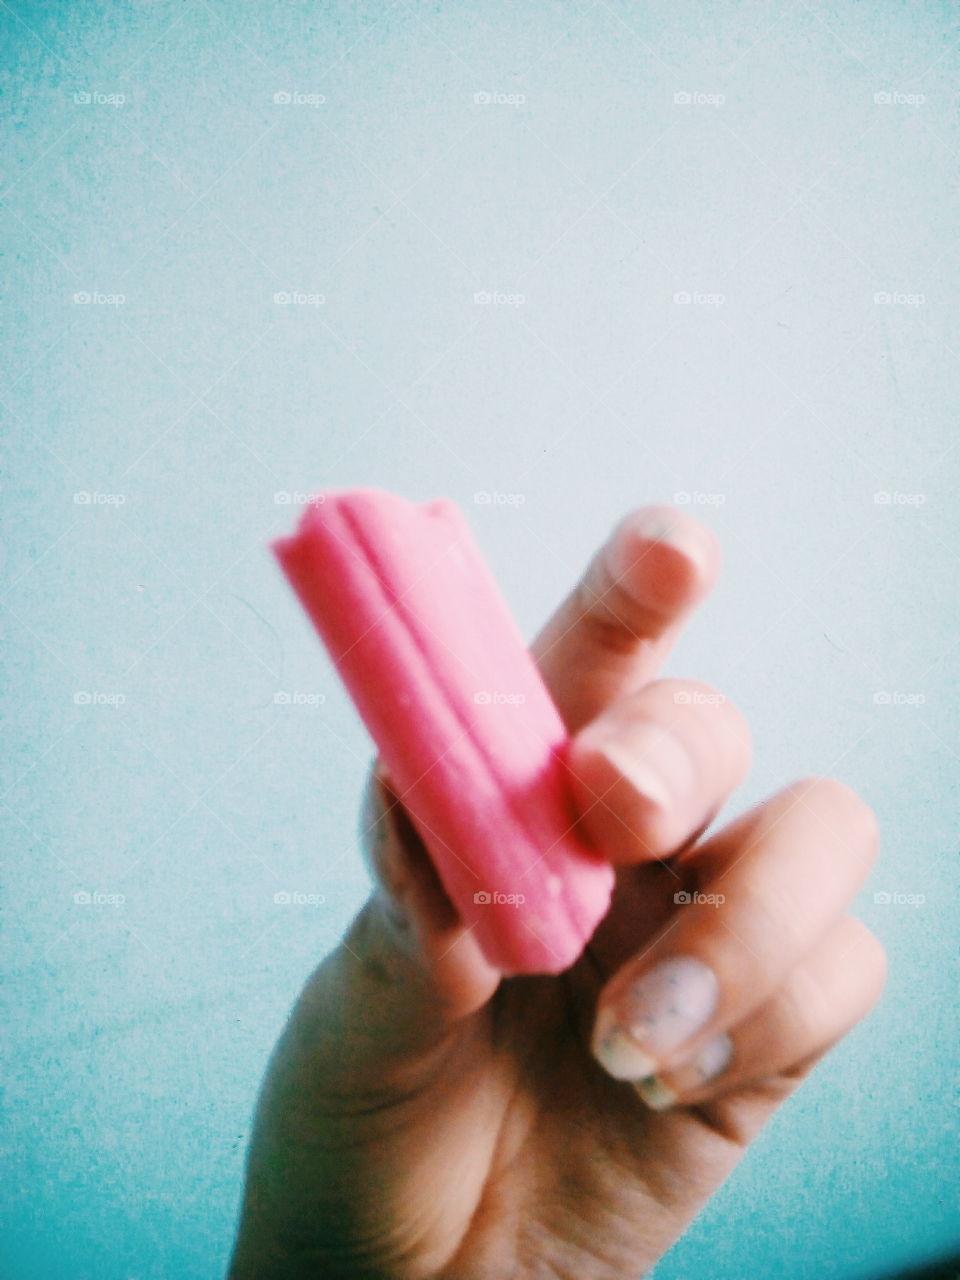 Candy pink